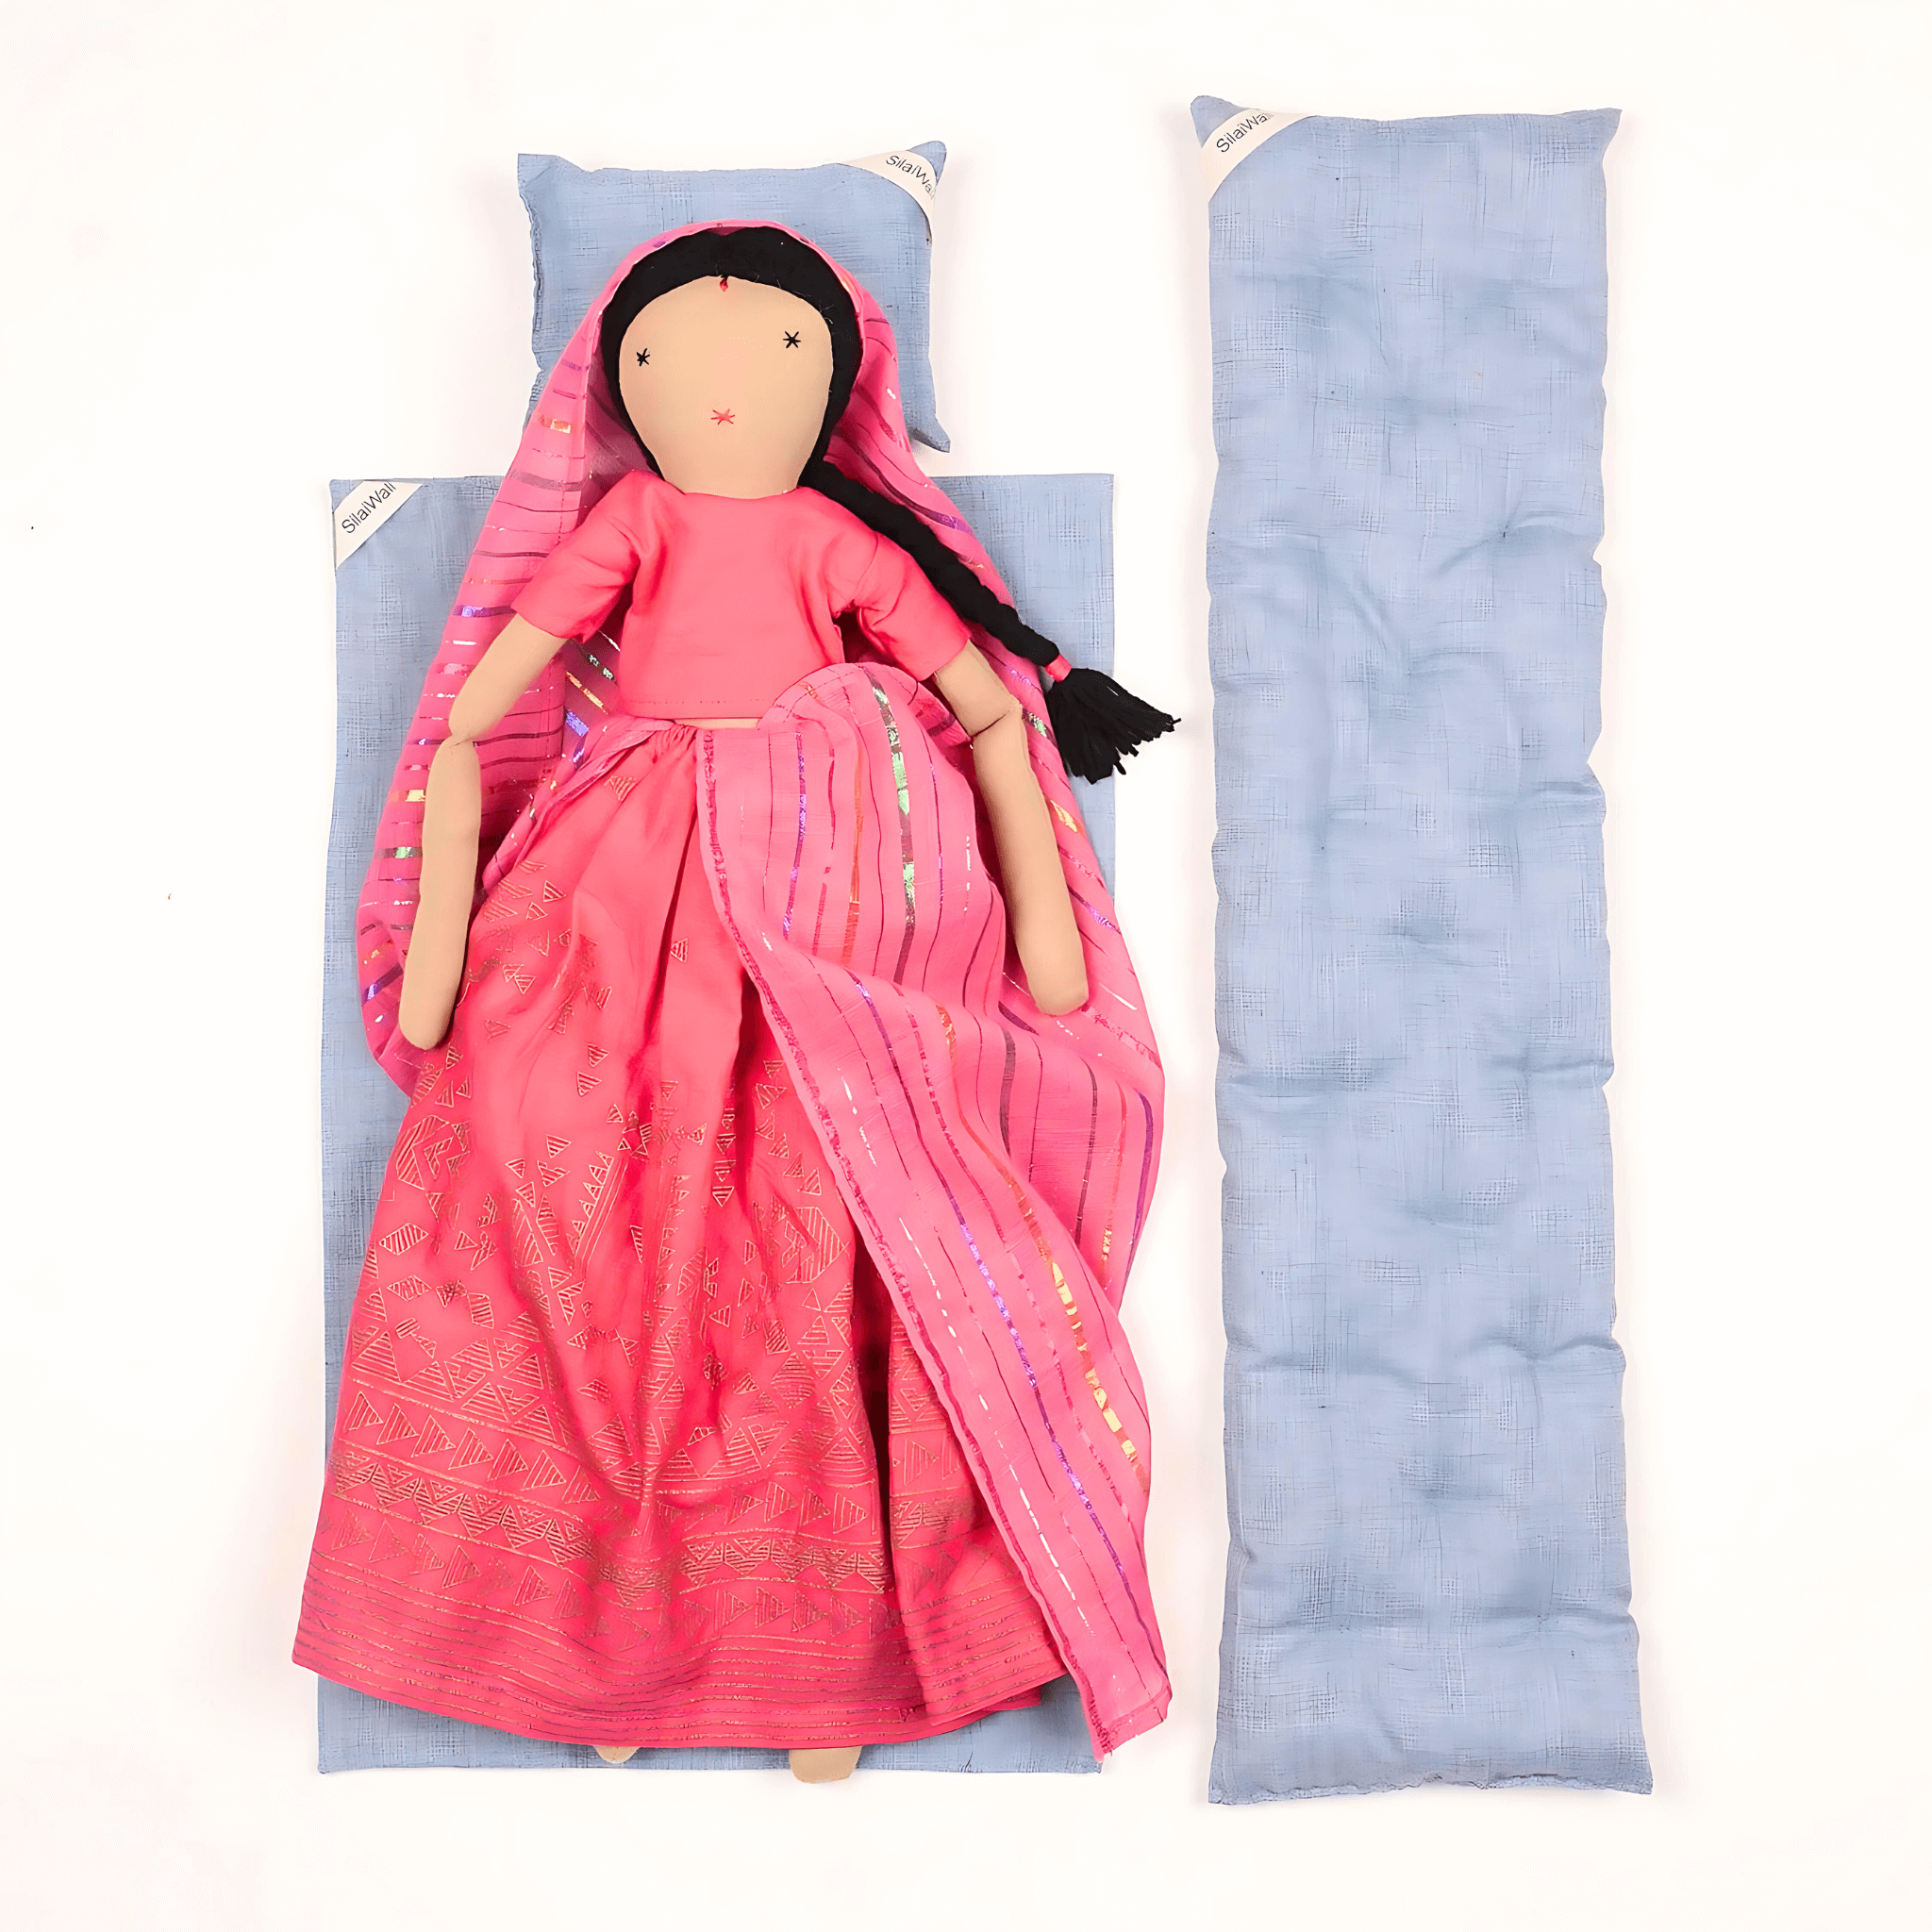 Banno Indian Doll from Silaiwali - Perfect Gift for Indian Child